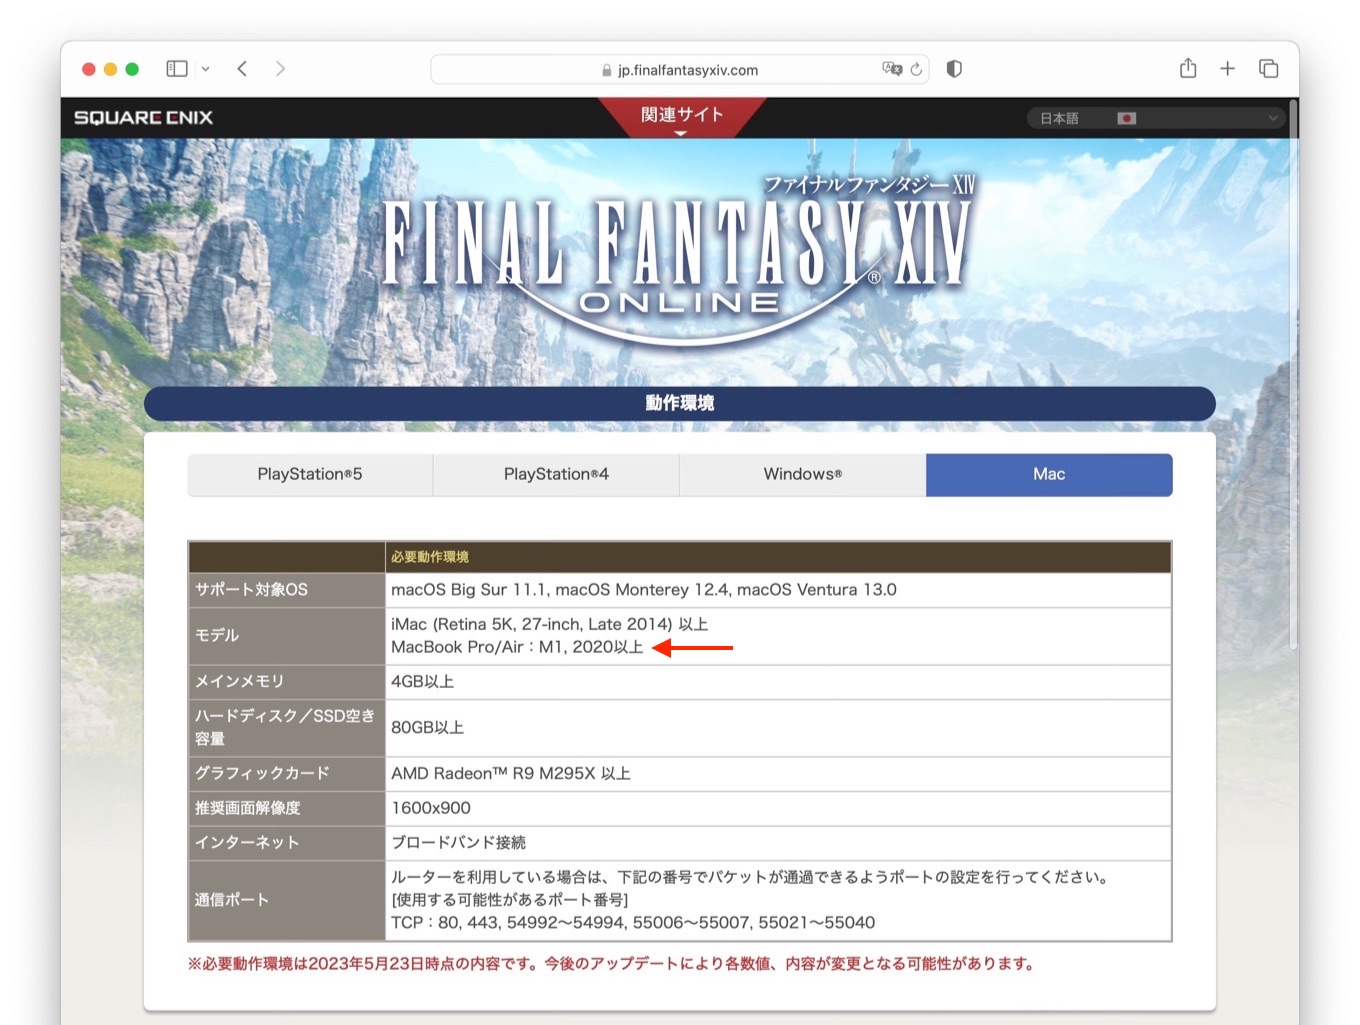 FINAL FANTASY XIV Online for Mac Apple Silicon support